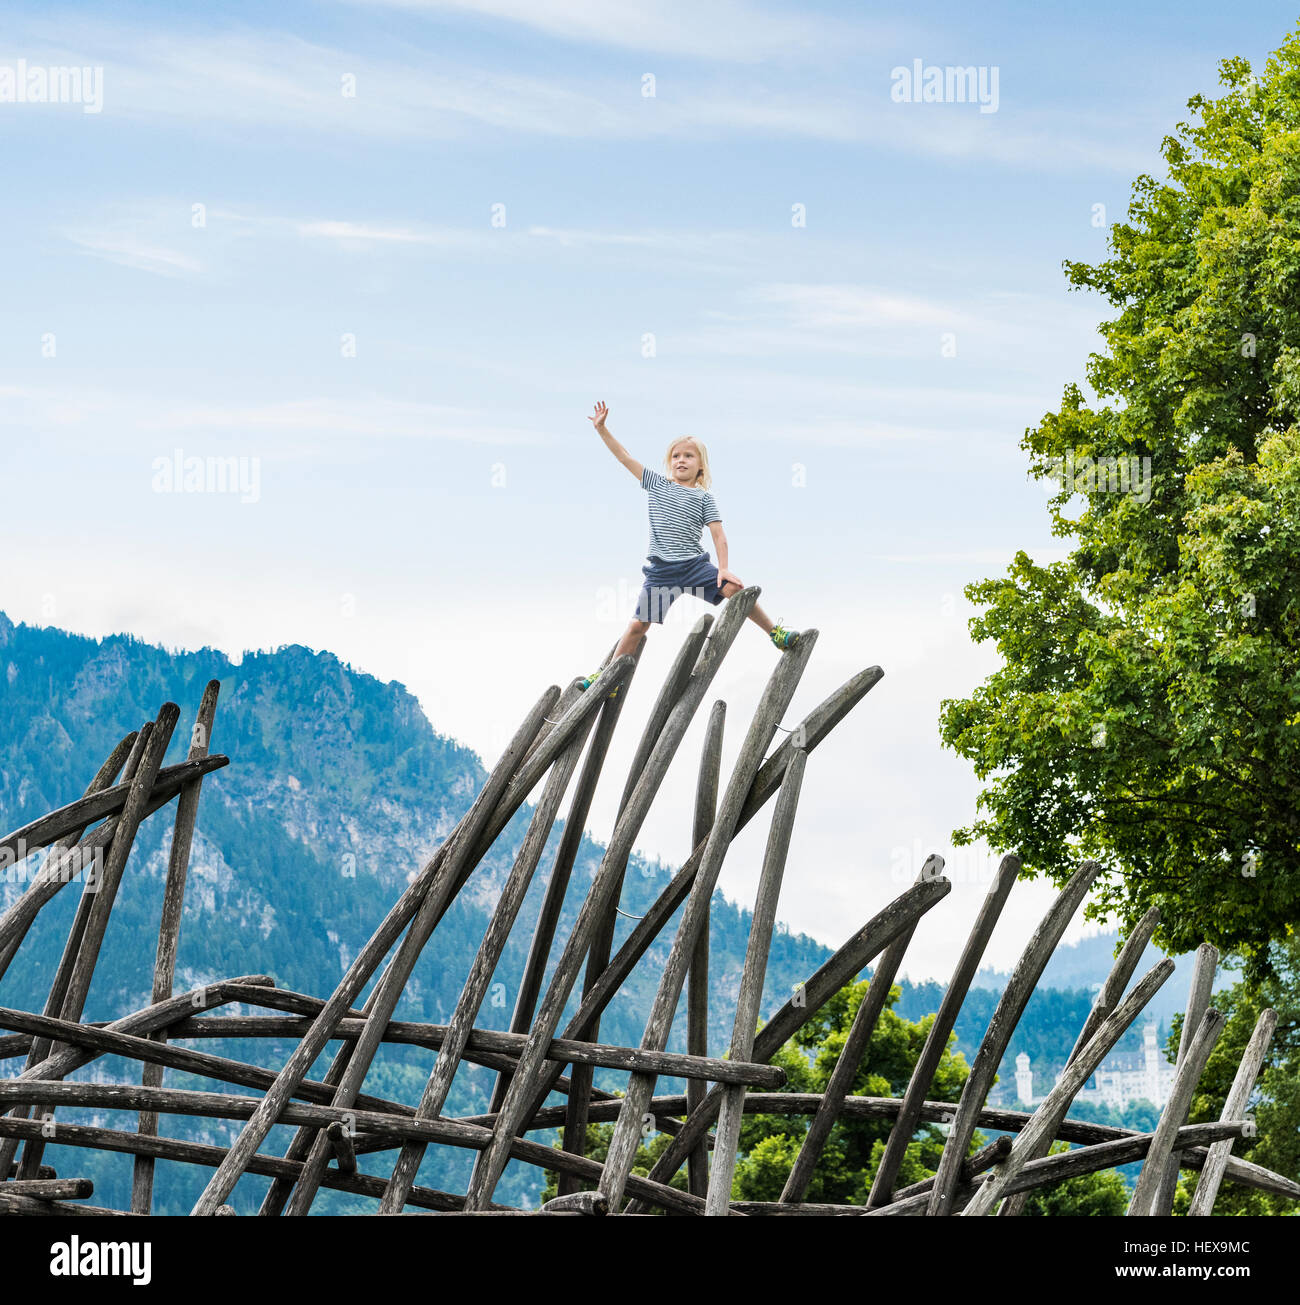 Boy standing on top of wooden structure in playground, Fuessen, Bavaria, Germany Stock Photo